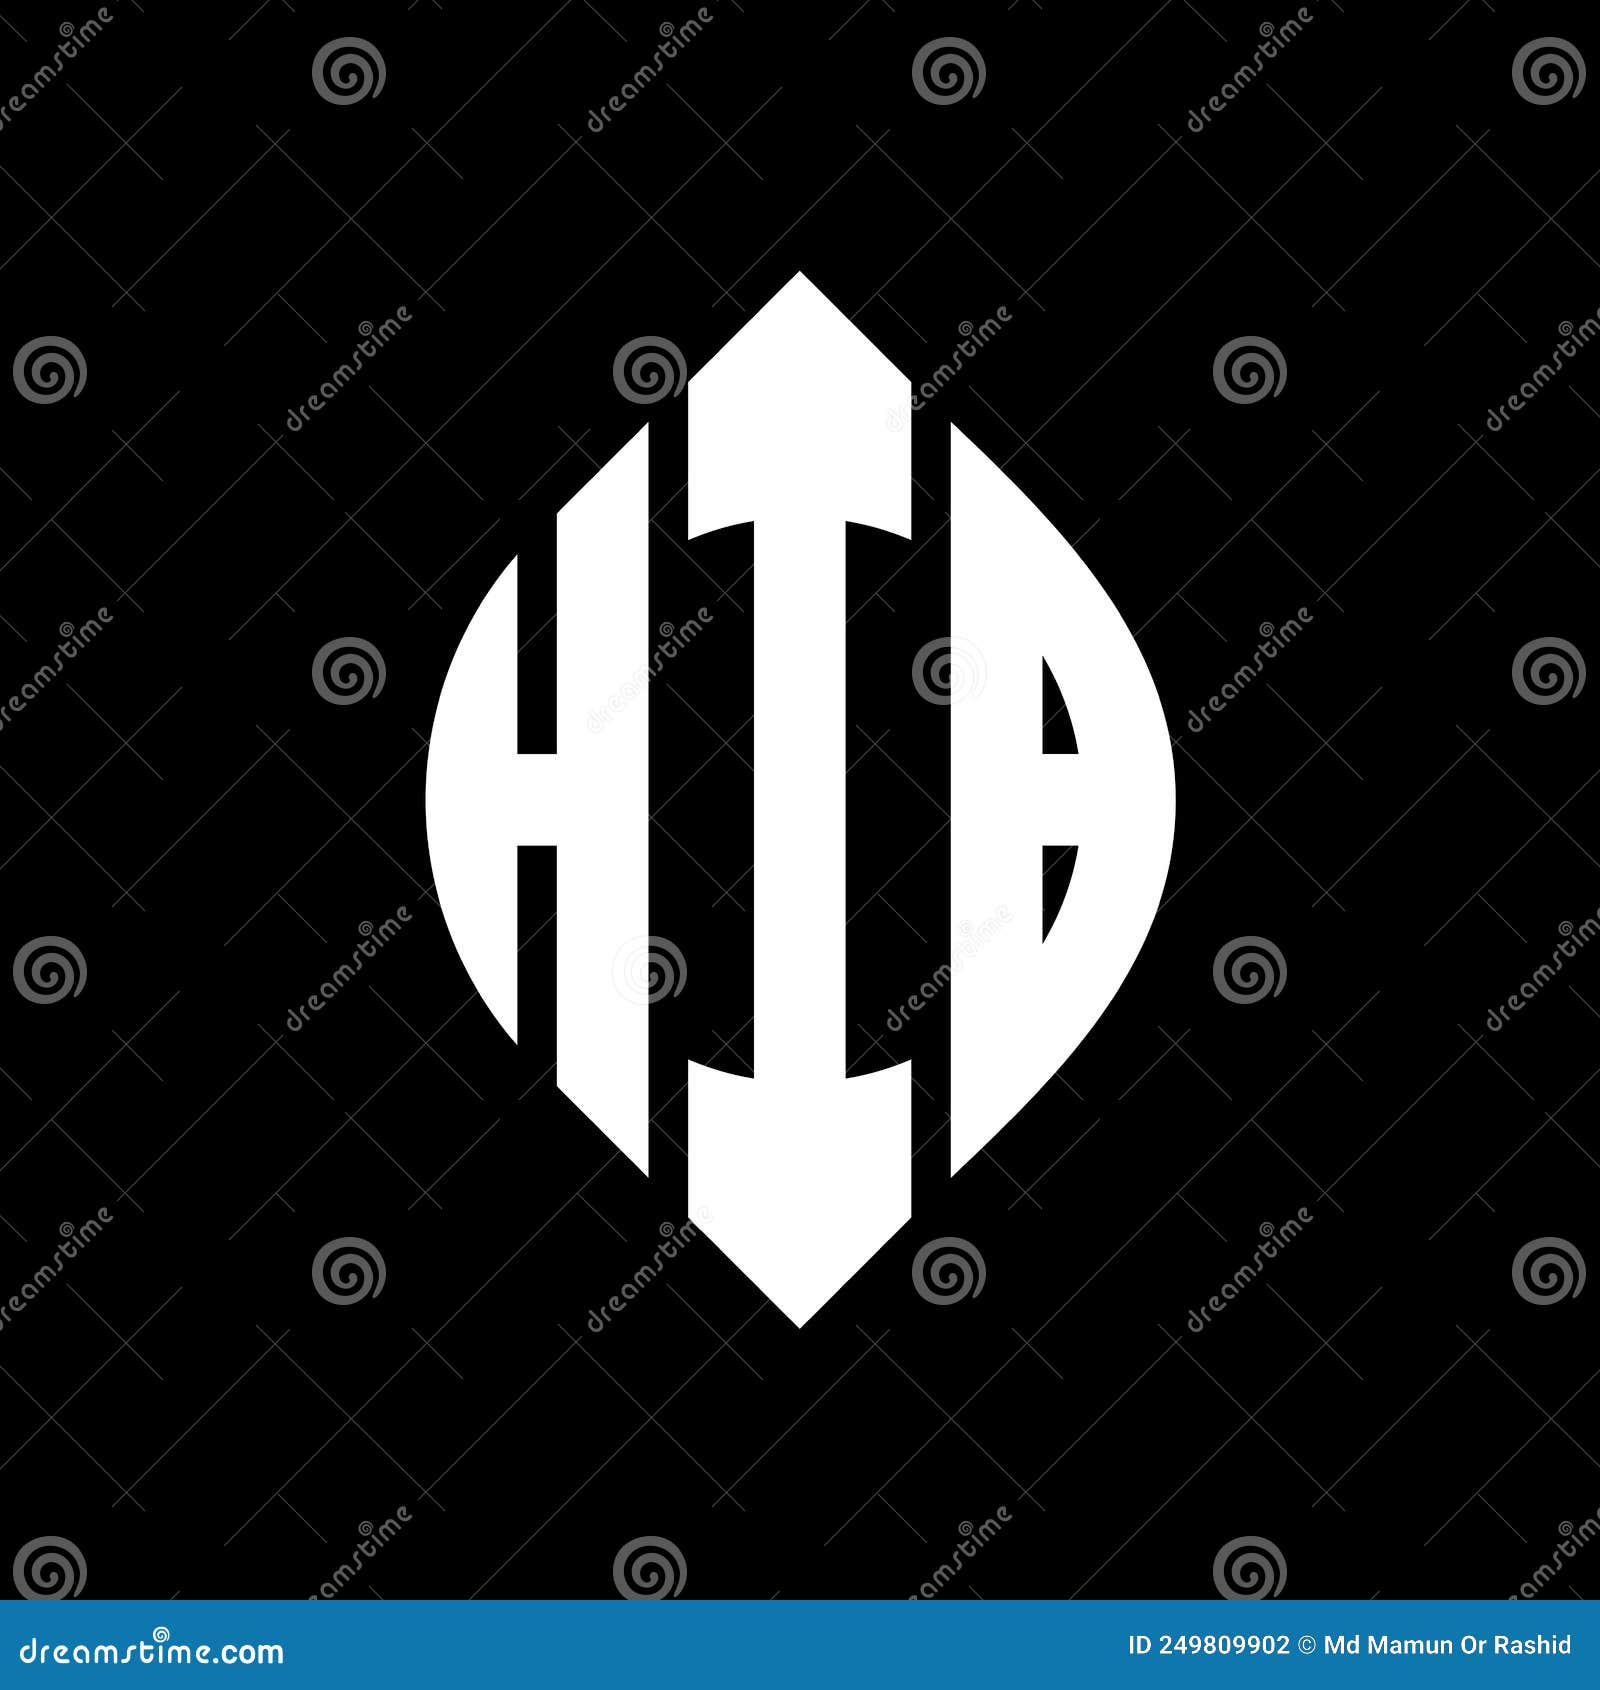 hib circle letter logo  with circle and ellipse . hib ellipse letters with typographic style. the three initials form a